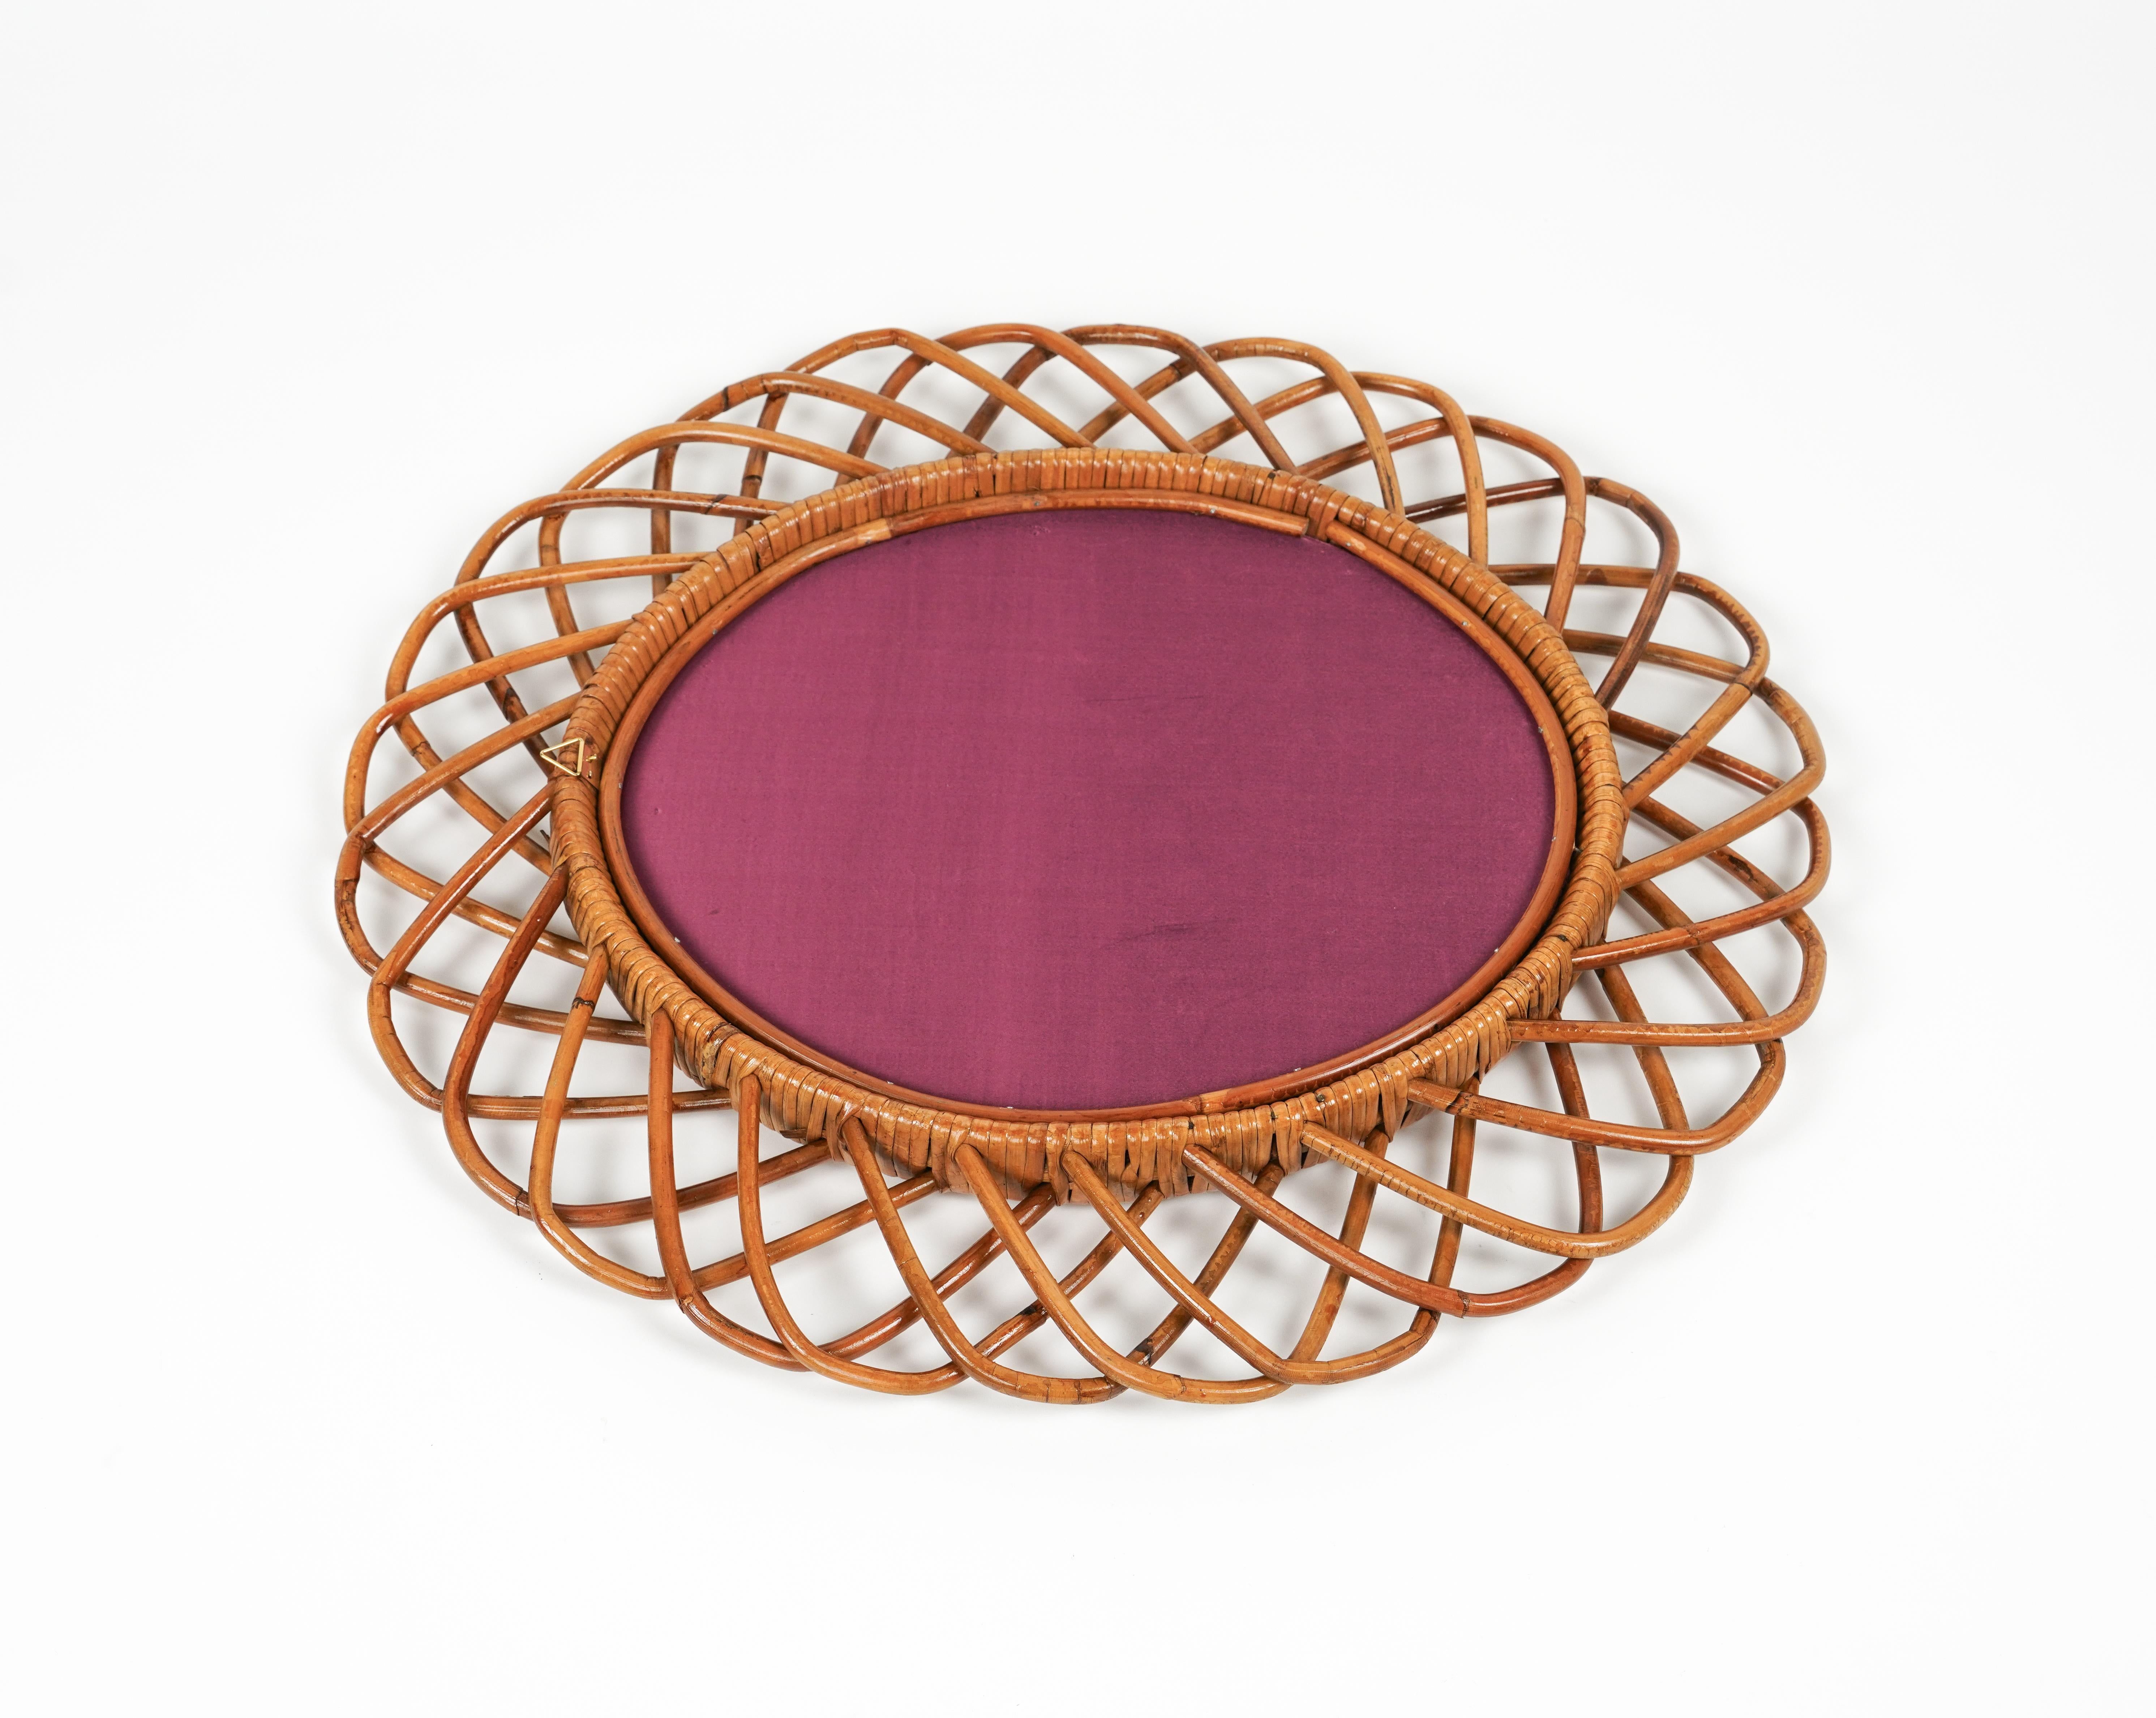 Midcentury Rattan and Bamboo Oval Wall Mirror, Italy 1960s For Sale 7